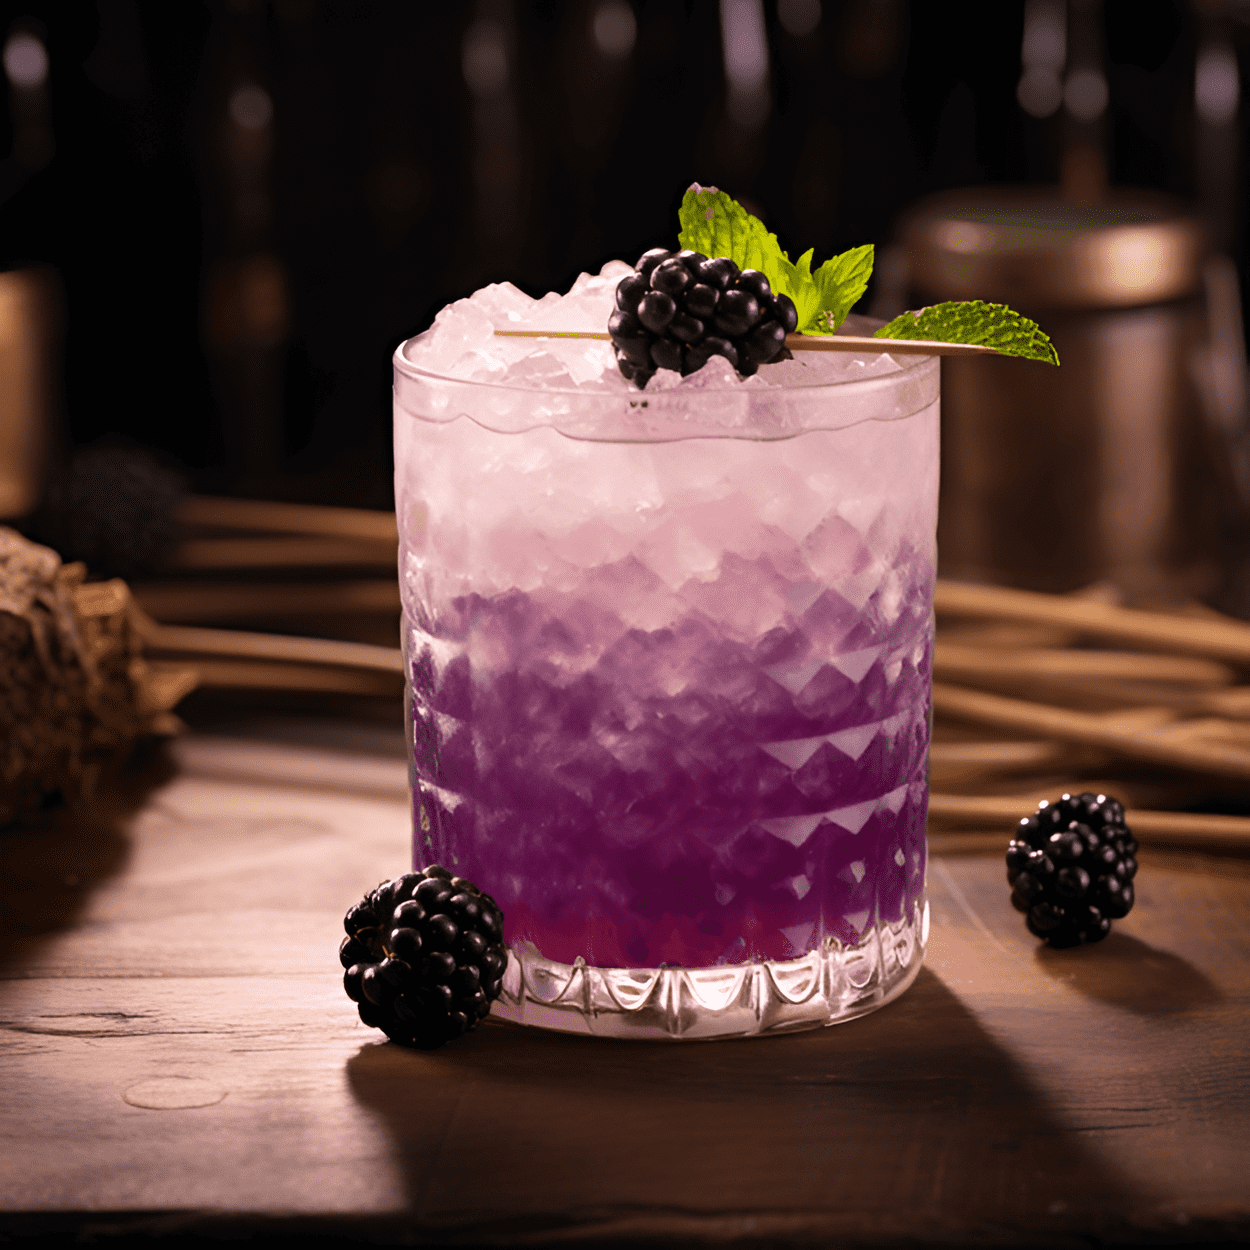 Coconut Bramble Cocktail Recipe - The Coconut Bramble is a delightful blend of sweet, sour, and fruity flavors. The coconut rum brings a sweet and tropical taste, while the blackberry liqueur adds a fruity and slightly tart flavor. The lemon juice balances out the sweetness with its tangy freshness.